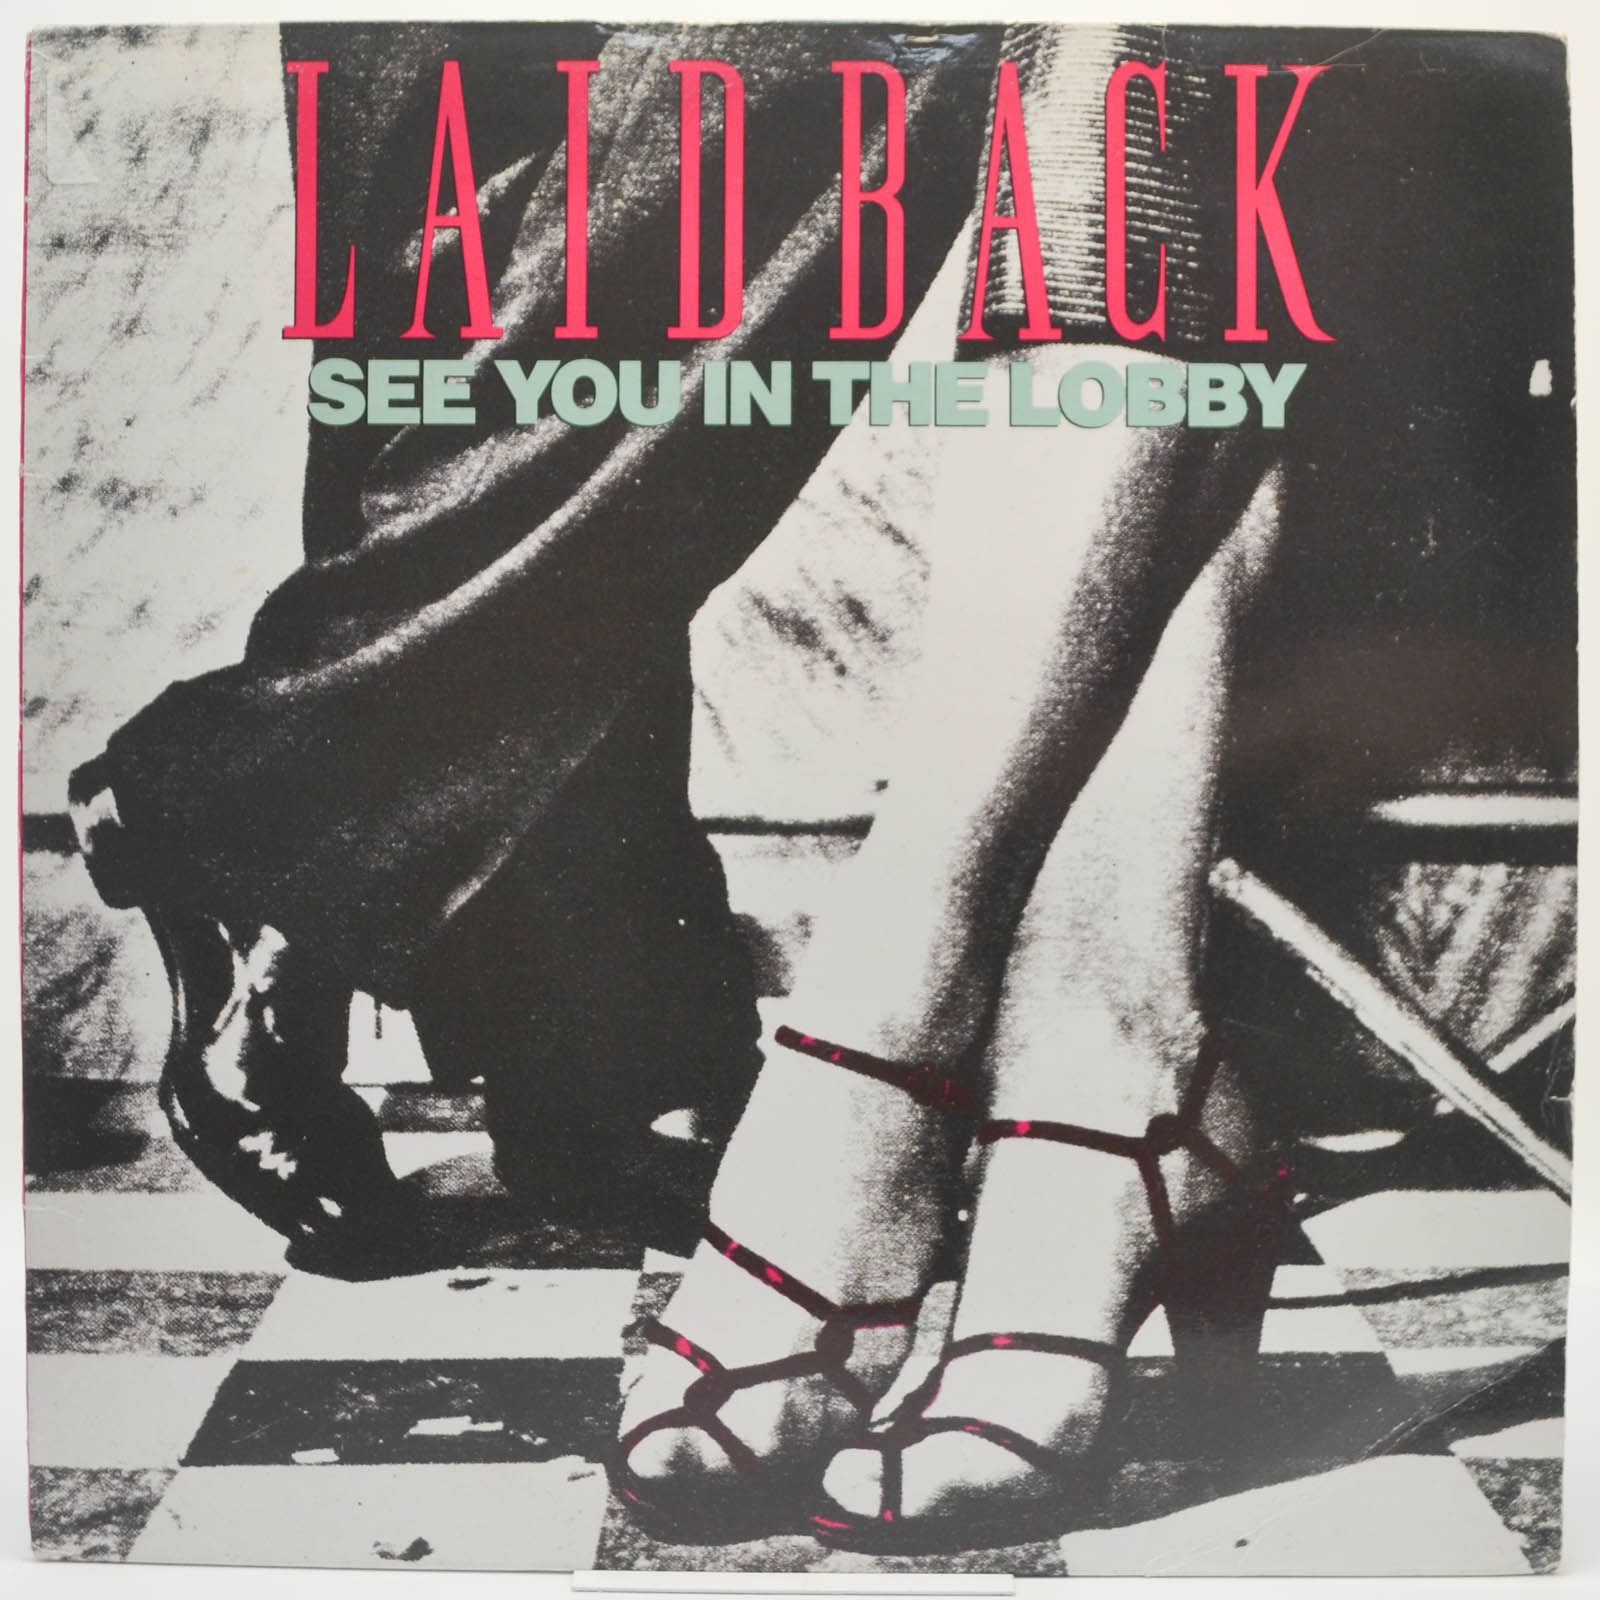 Laid Back — See You In The Lobby, 1987